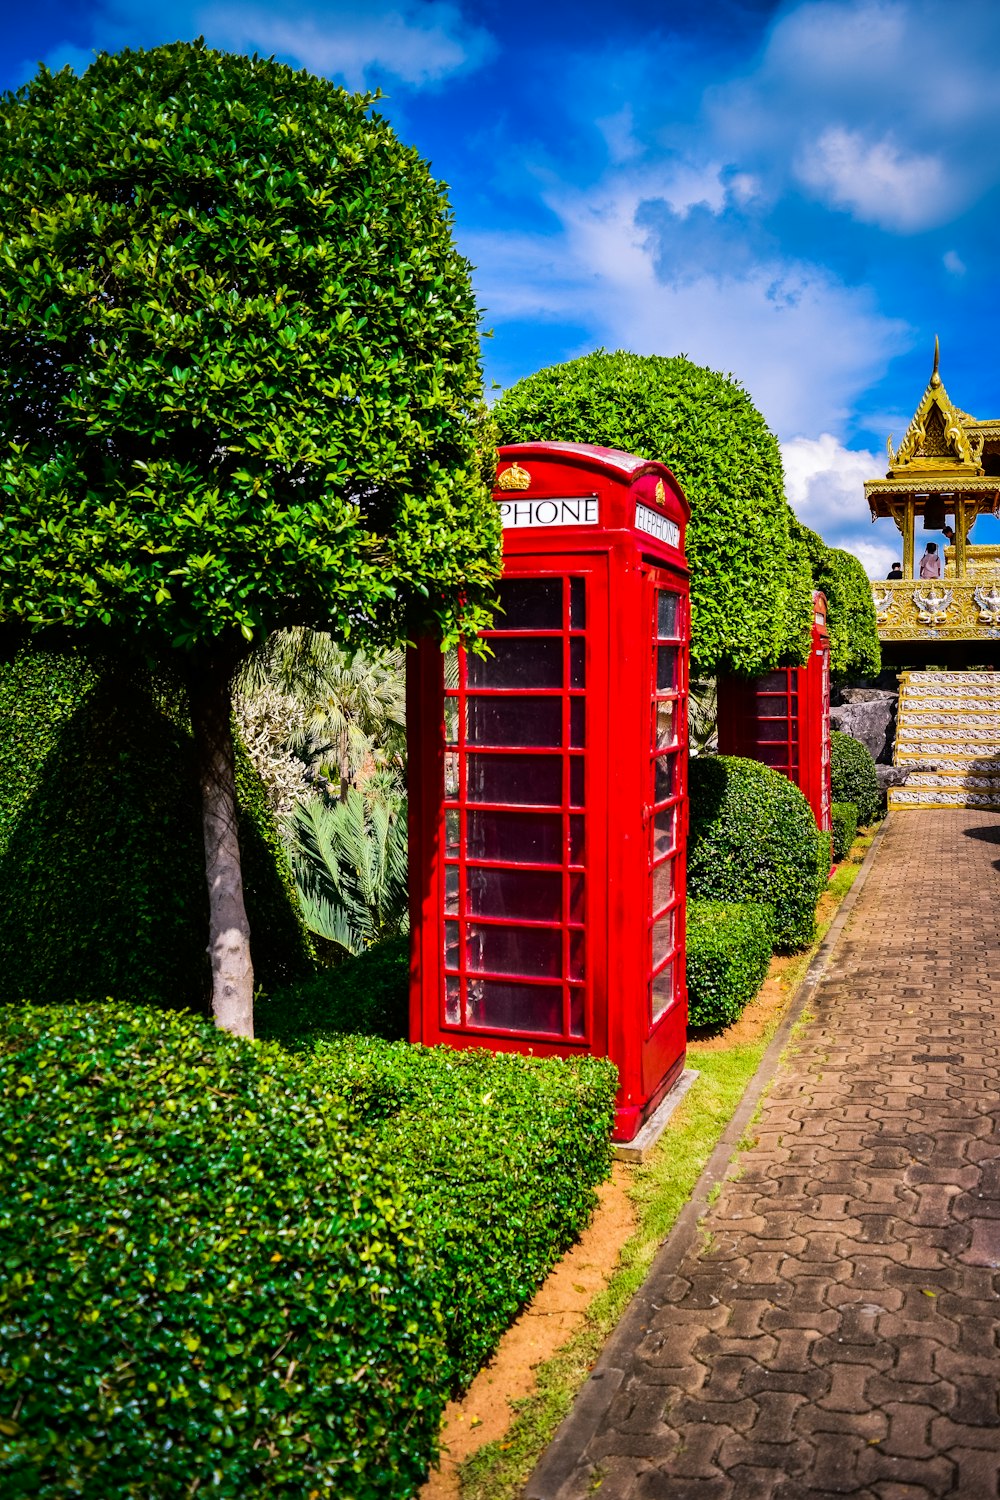 a red phone booth sitting in the middle of a garden